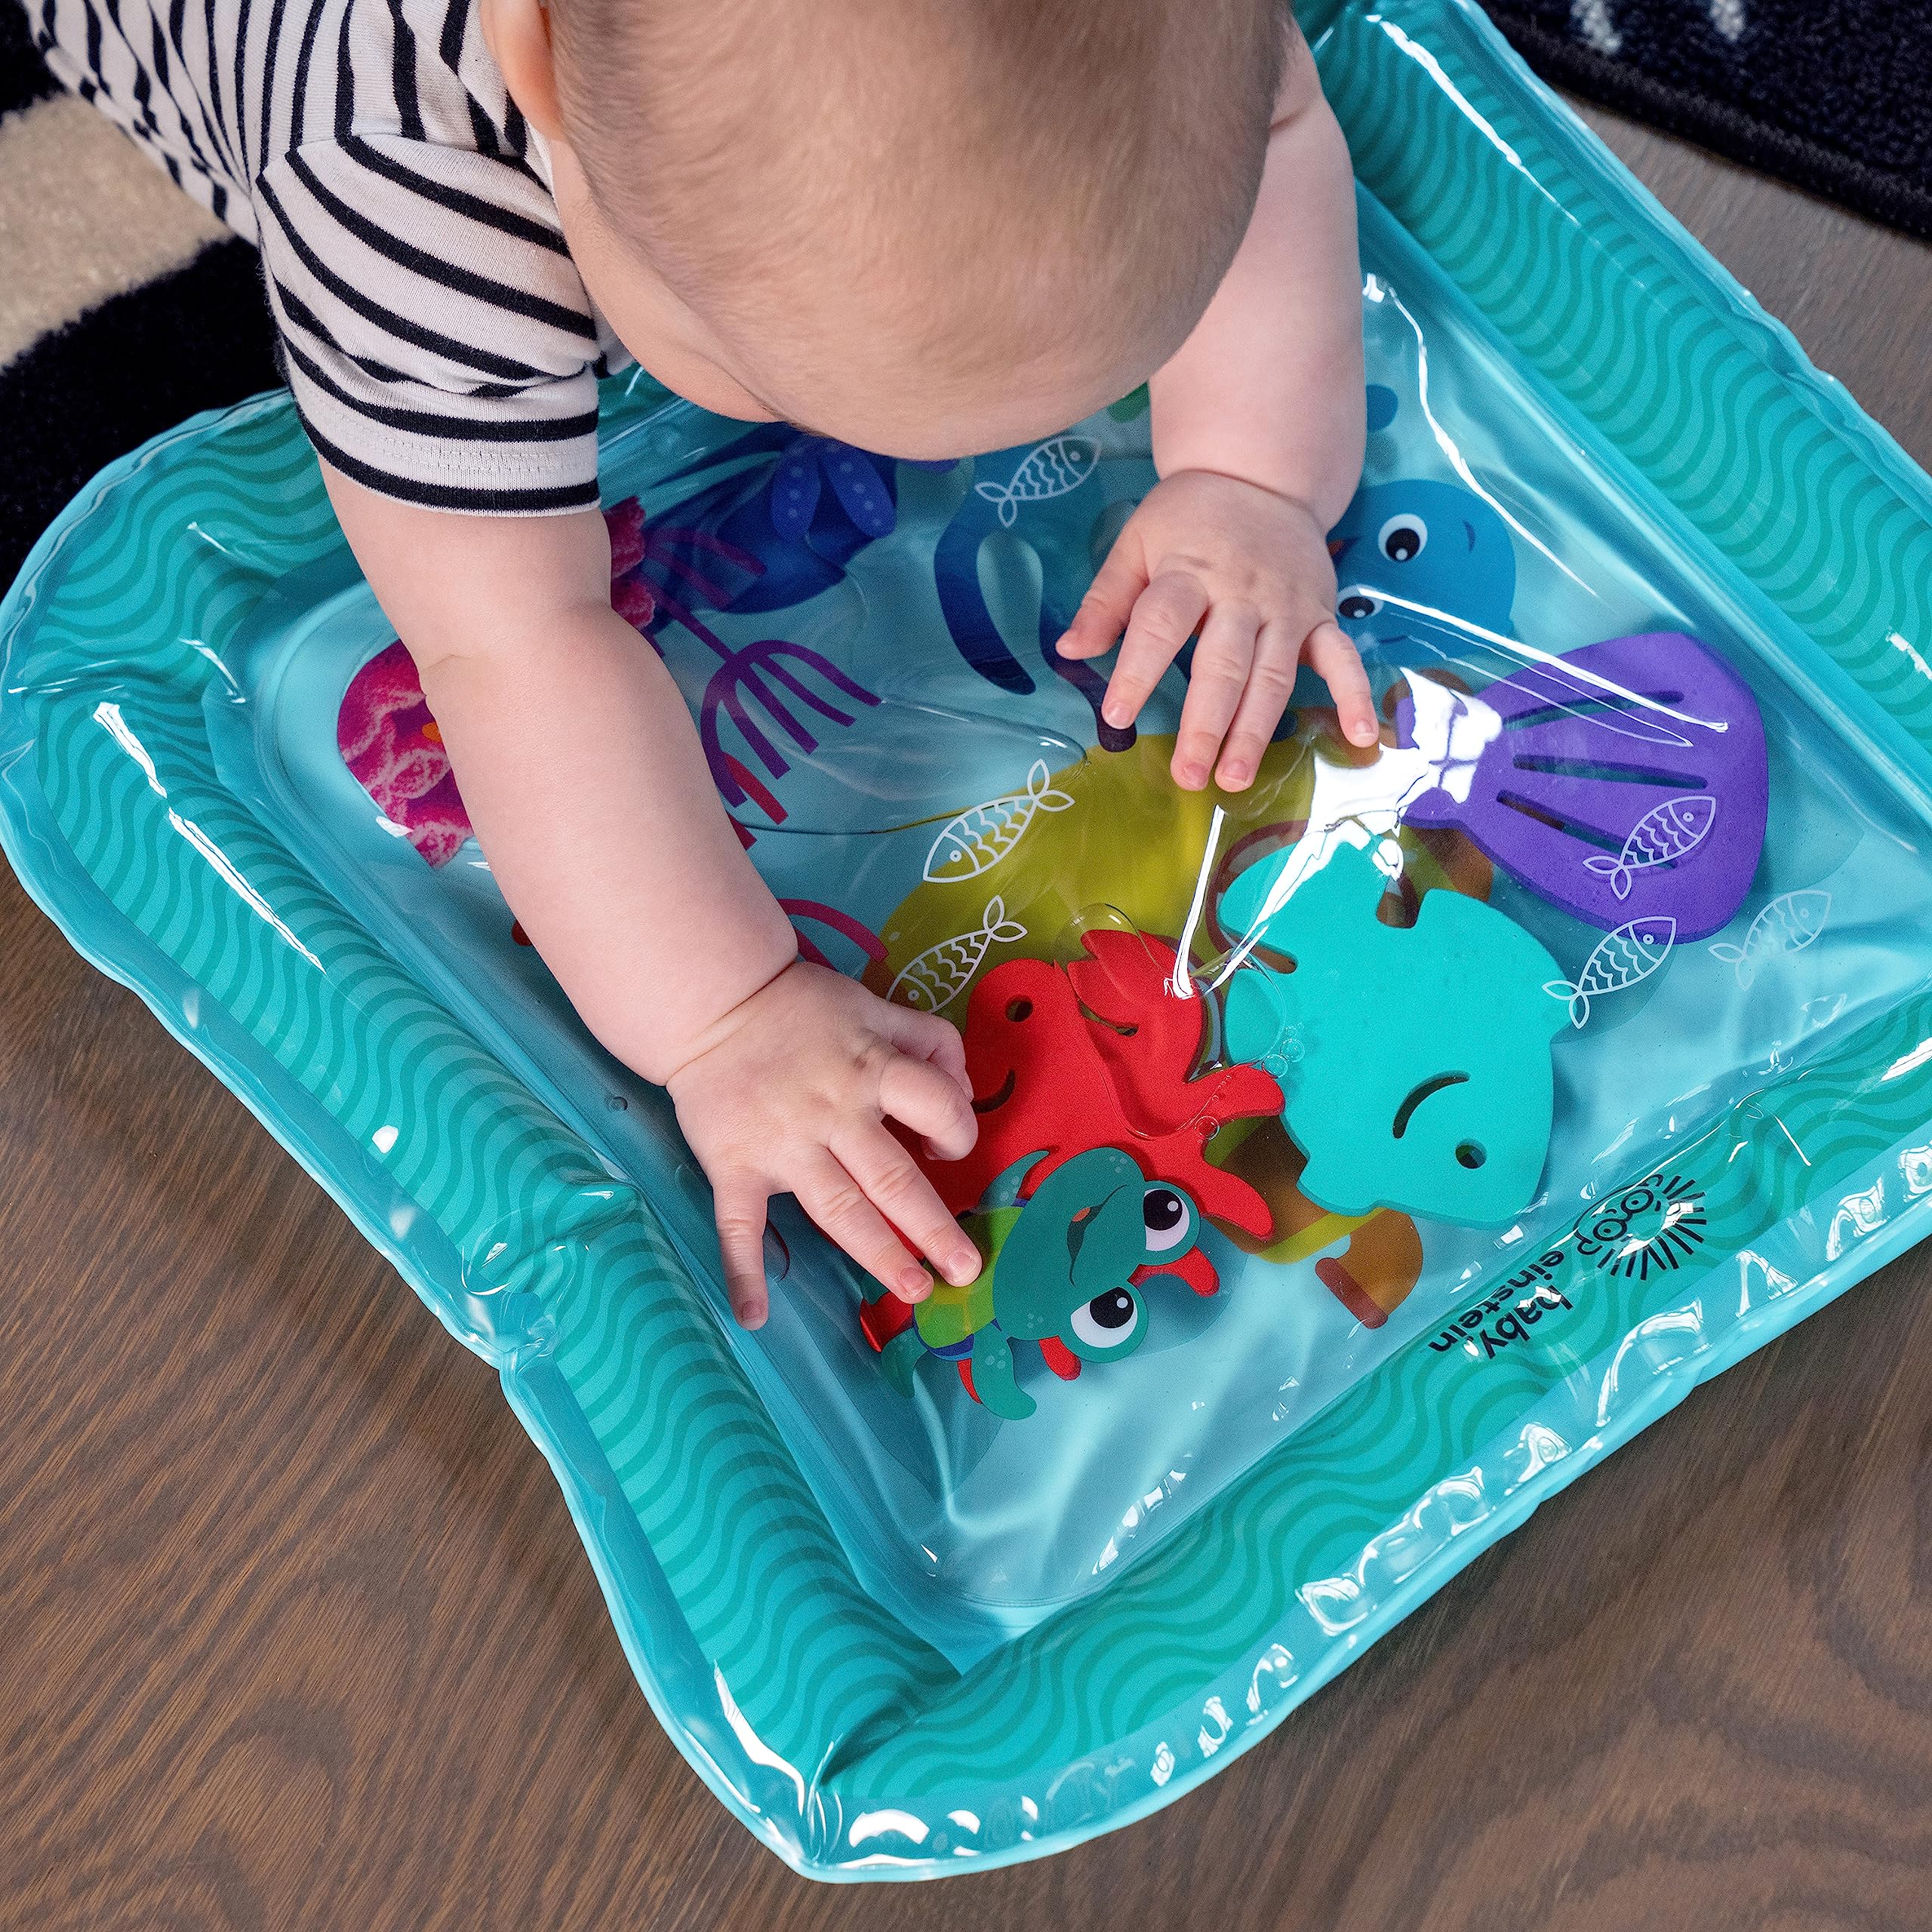 Baby Einstein Ocean Explorers Sensory Splash Water Mat, for Tummy Time or Seated Play, Ages 0-36 Months